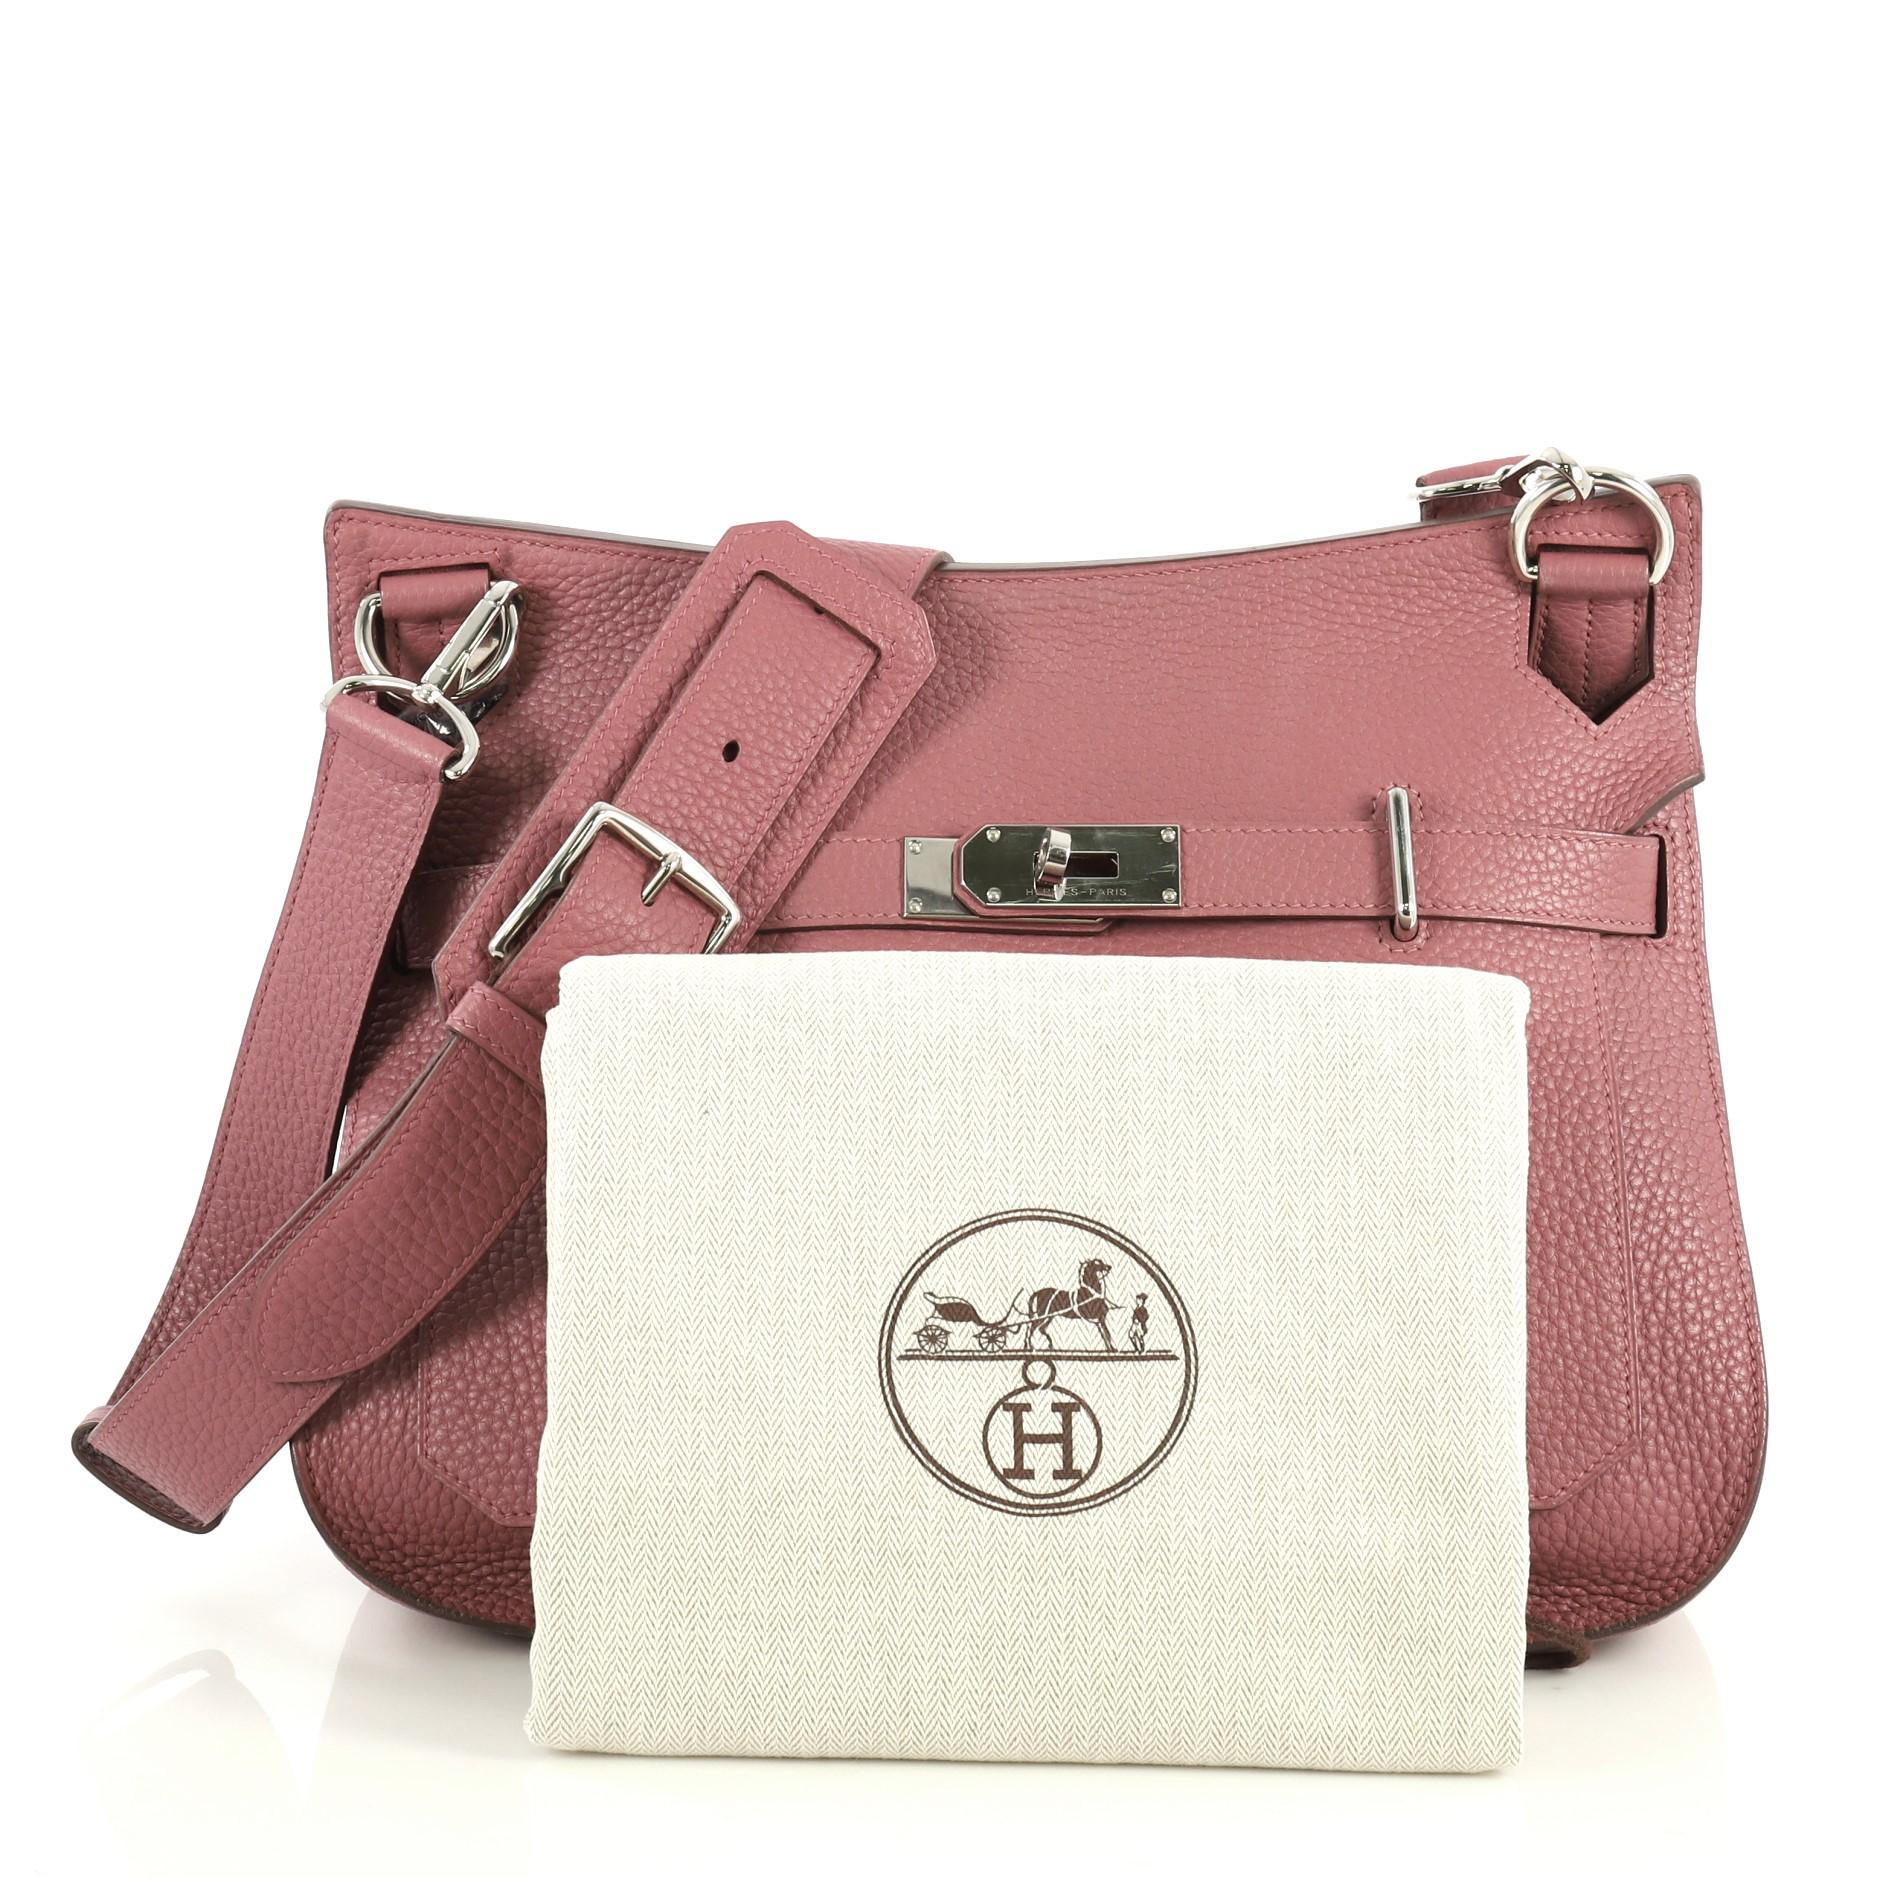 This Hermes Jypsiere Handbag Fjord 31, crafted from Bois de Rose pink Fjord leather, features an adjustable leather shoulder strap and palladium hardware. Its front flap with turn-lock clasp closure opens to a Bois de Rose pink Chevre leather